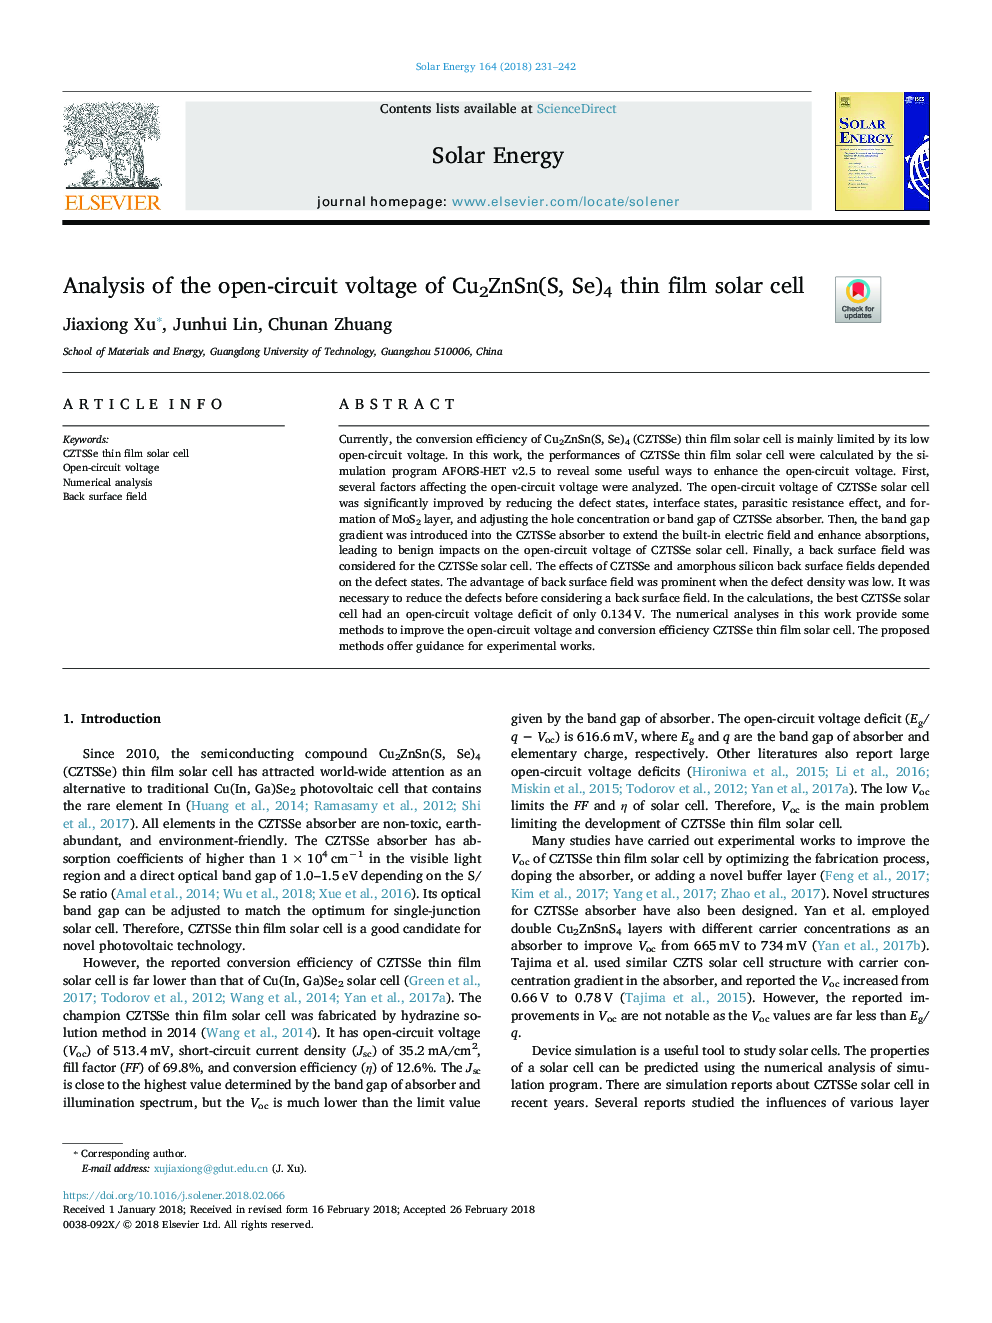 Analysis of the open-circuit voltage of Cu2ZnSn(S, Se)4 thin film solar cell